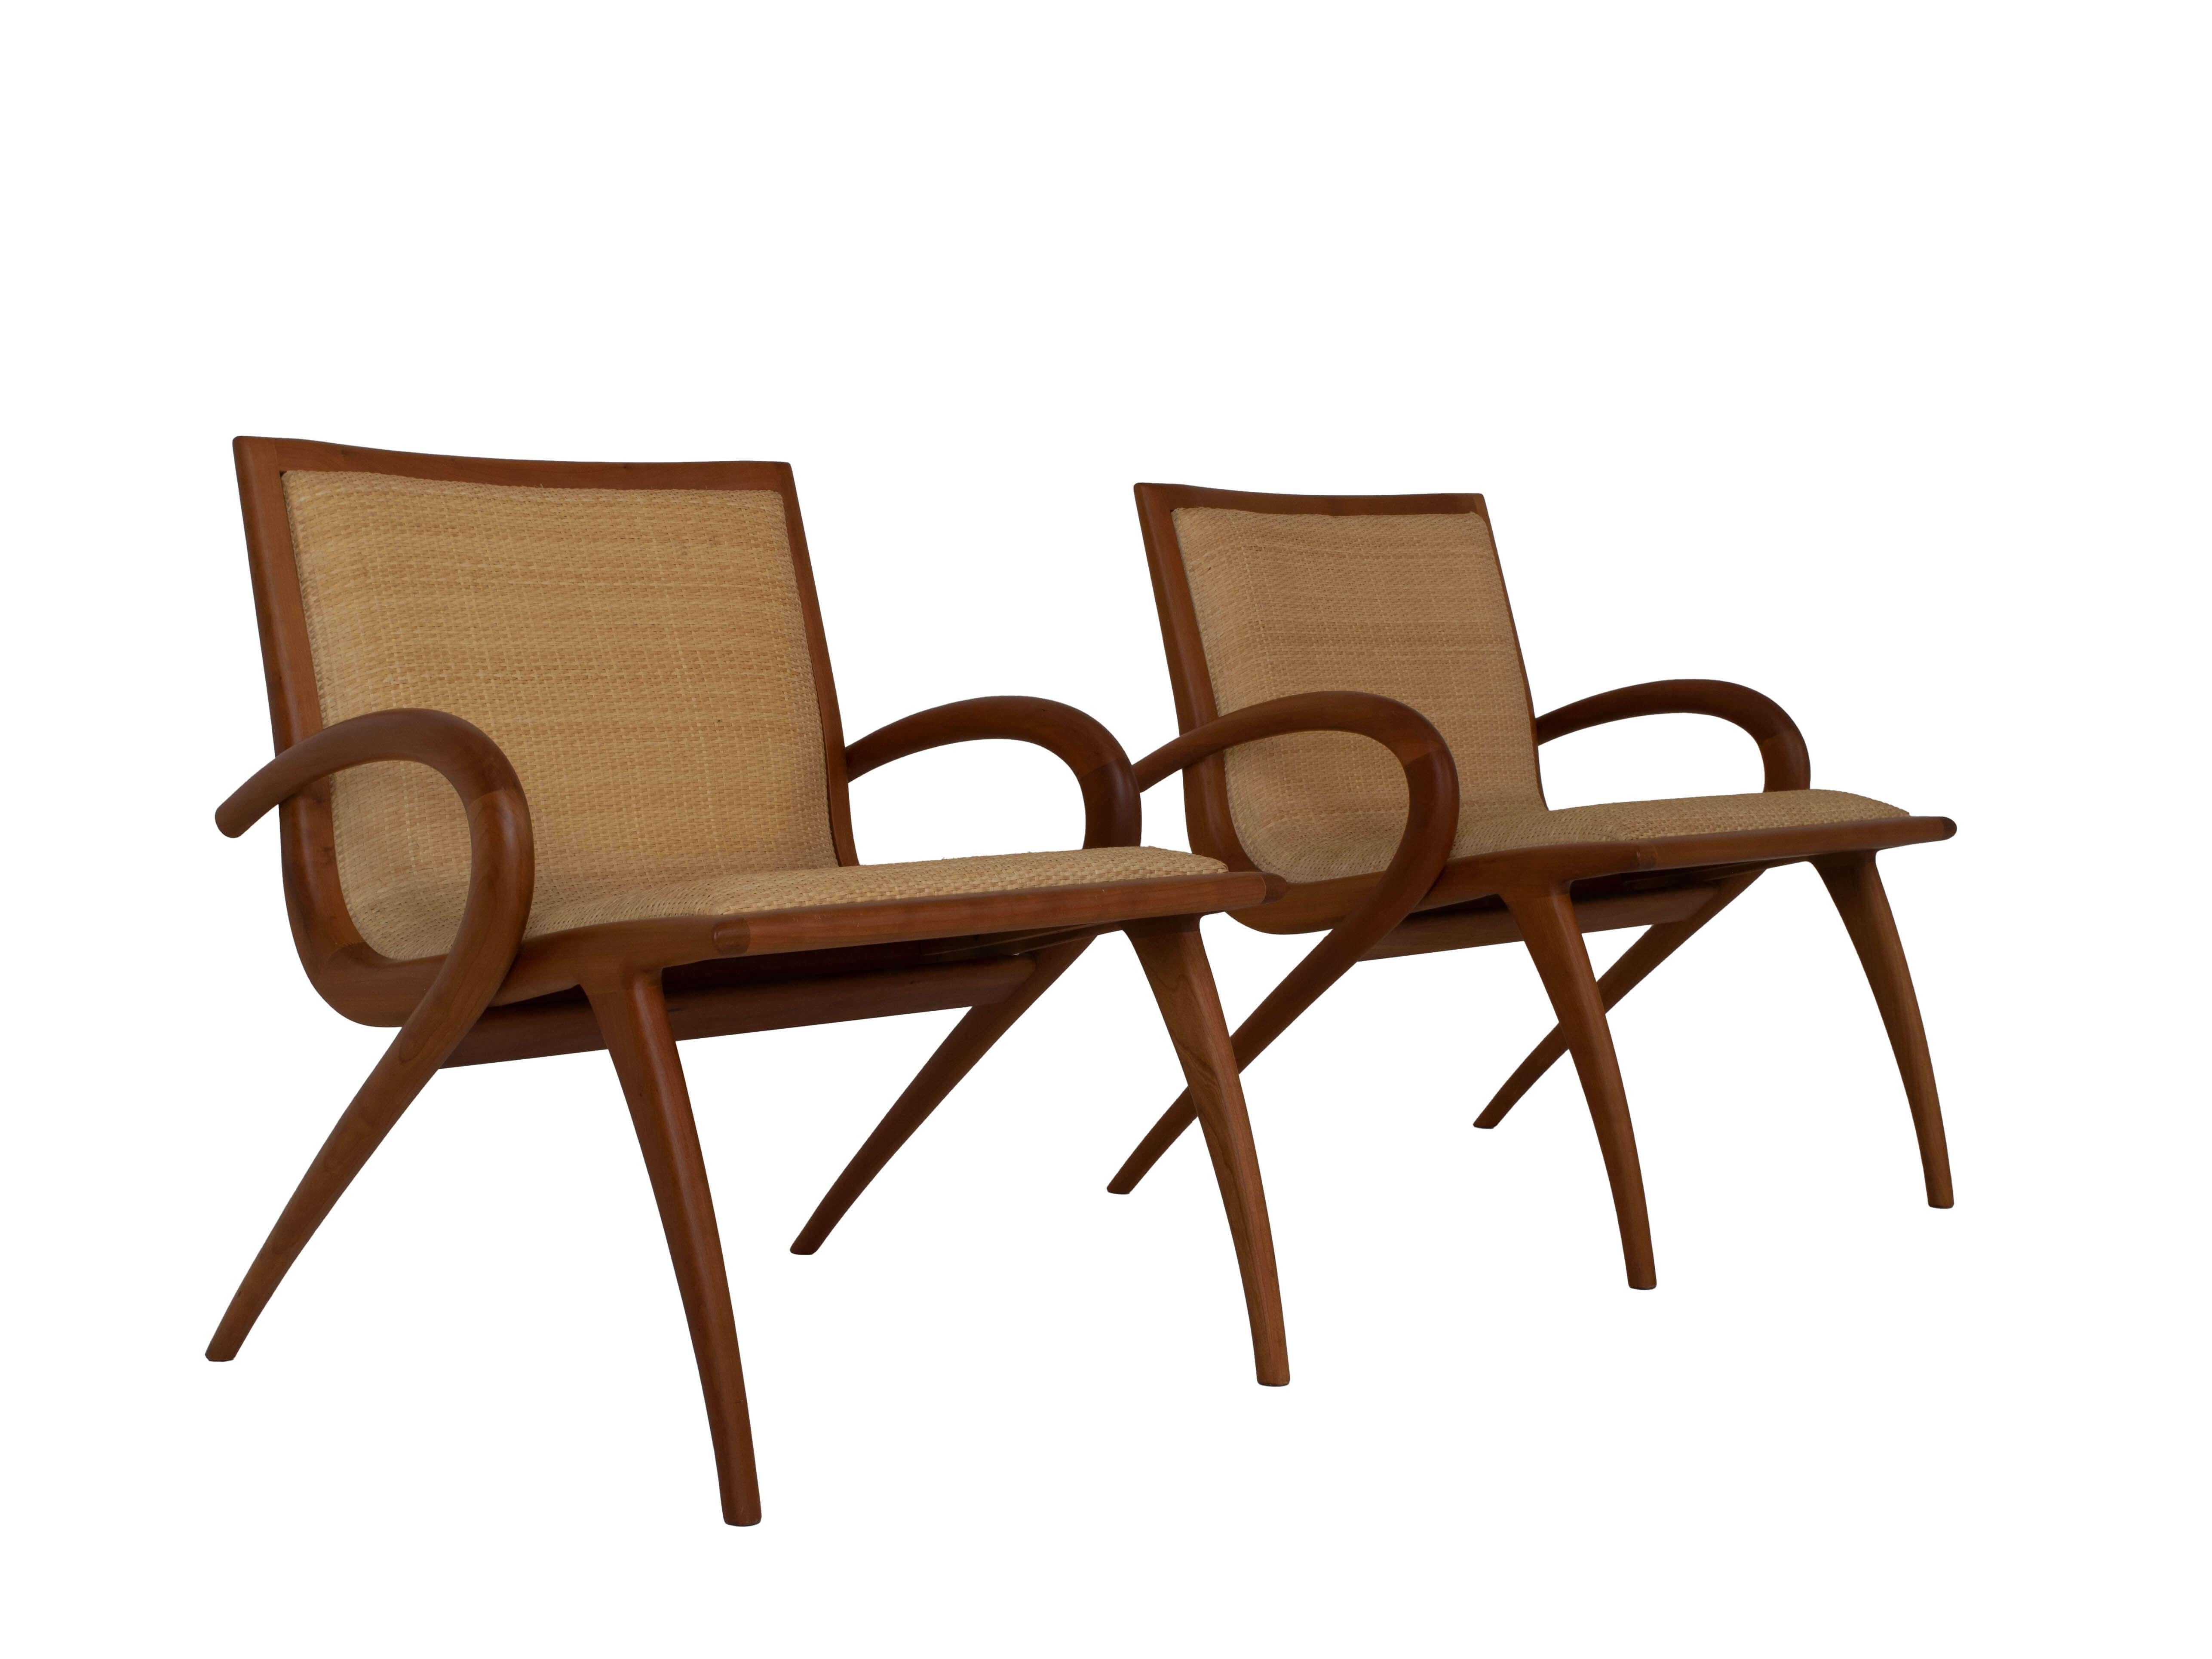 Amazing Set of two arm chairs by John Louis Graz, designed in Brazil 1950s. These organically shaped easy chairs are made of cherry wood and have padded wickerwork. The round shapes of the arm rests and legs make this an elegant and streamlined